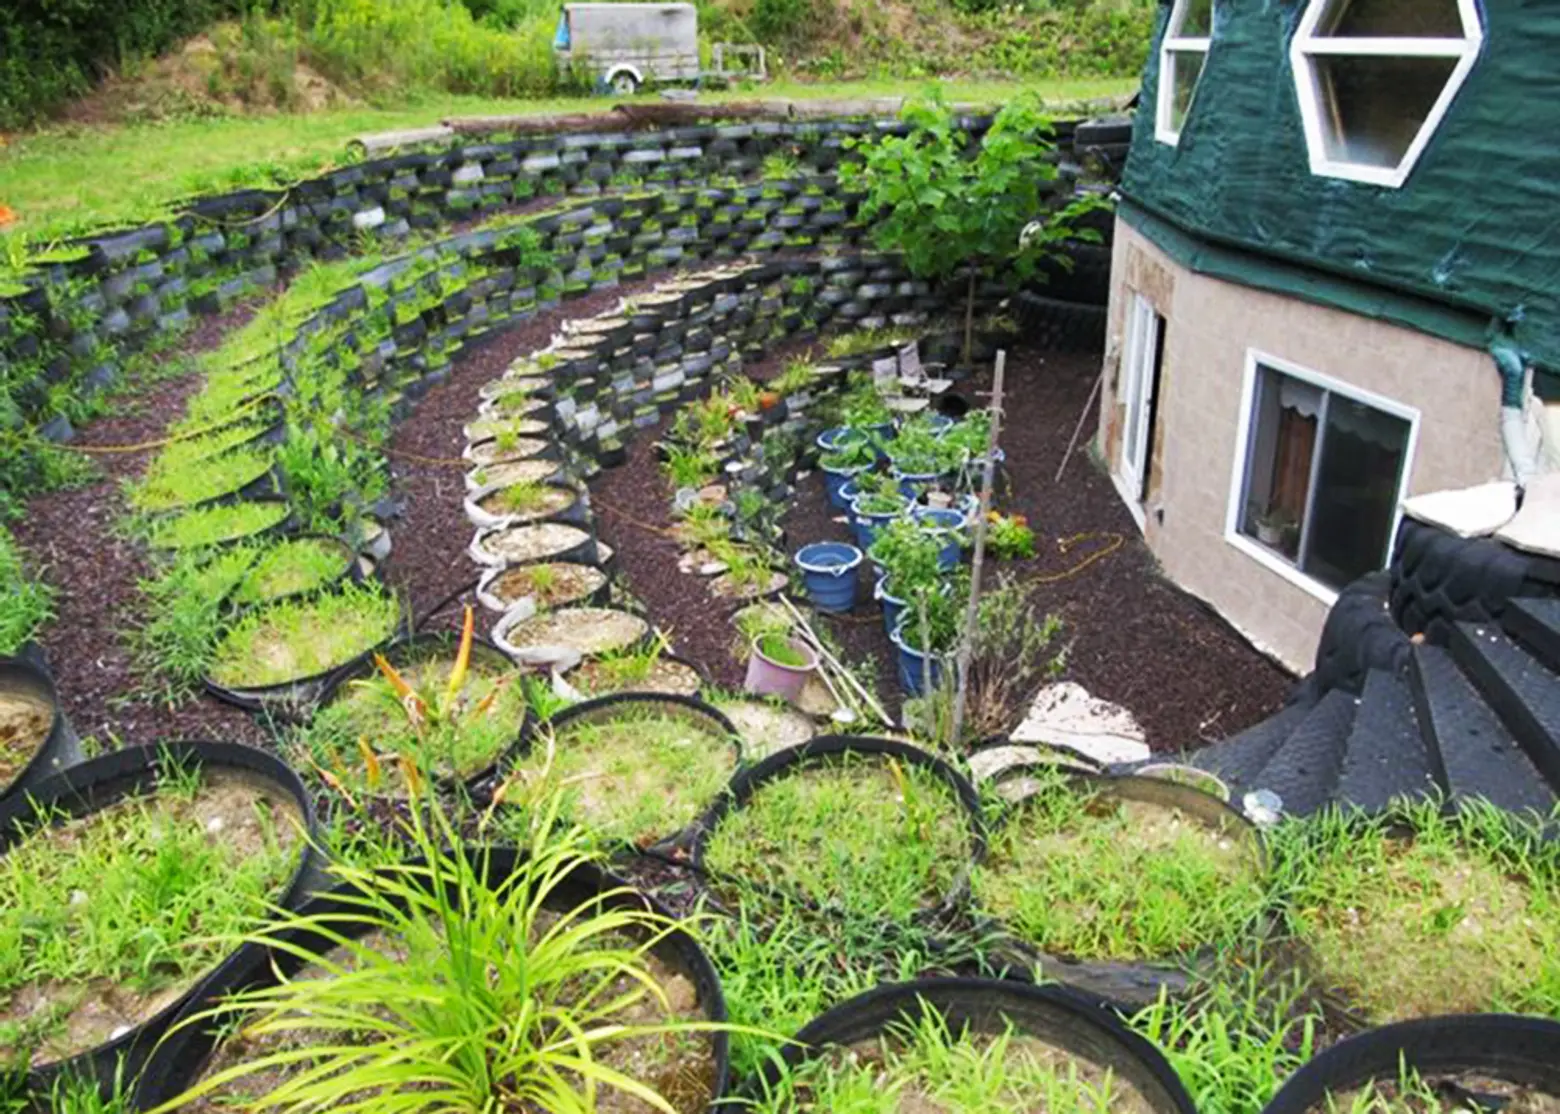 Kevin Shea, Long Island Green Dome, family home, largest geodesic dome-home in the world, terraced garden, recycled tires, green roof, spider web green roof, fruit trees, crosed circulation, daylight